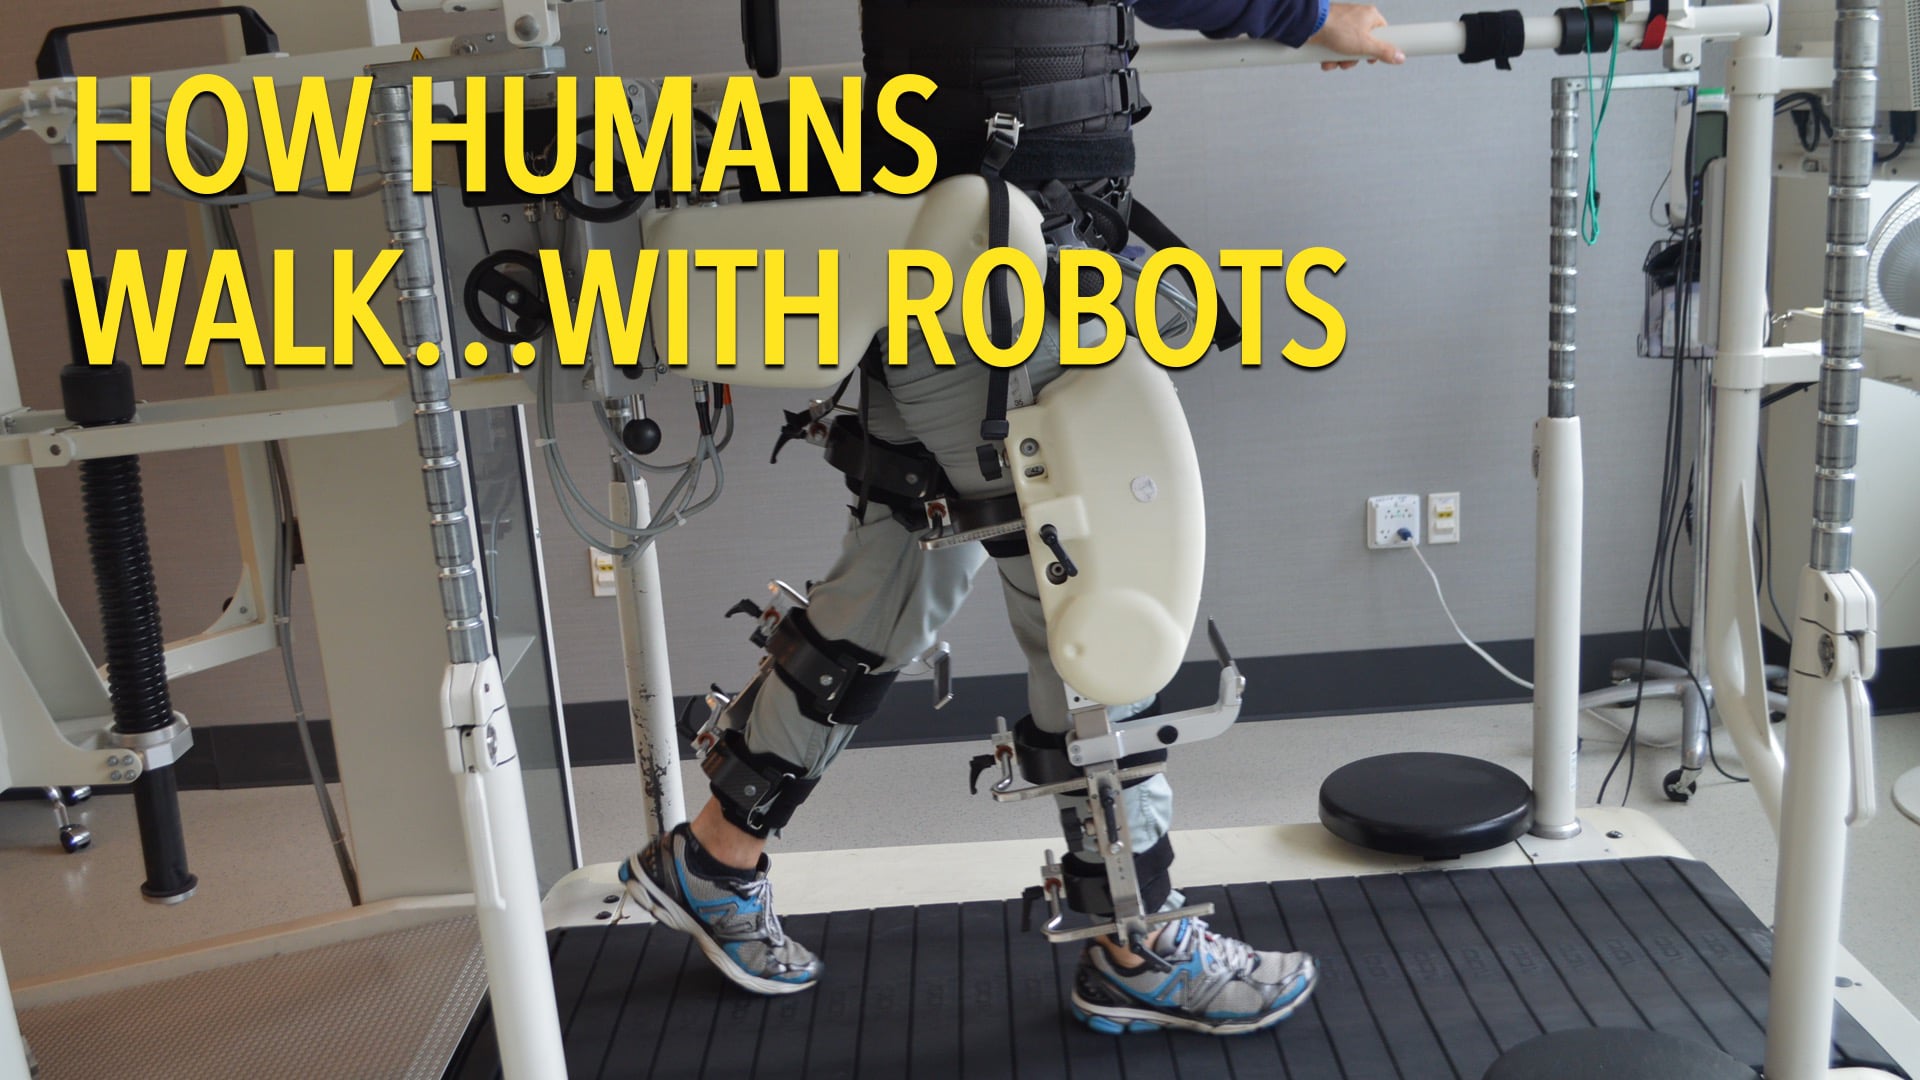 How Humans Walk...With Robots